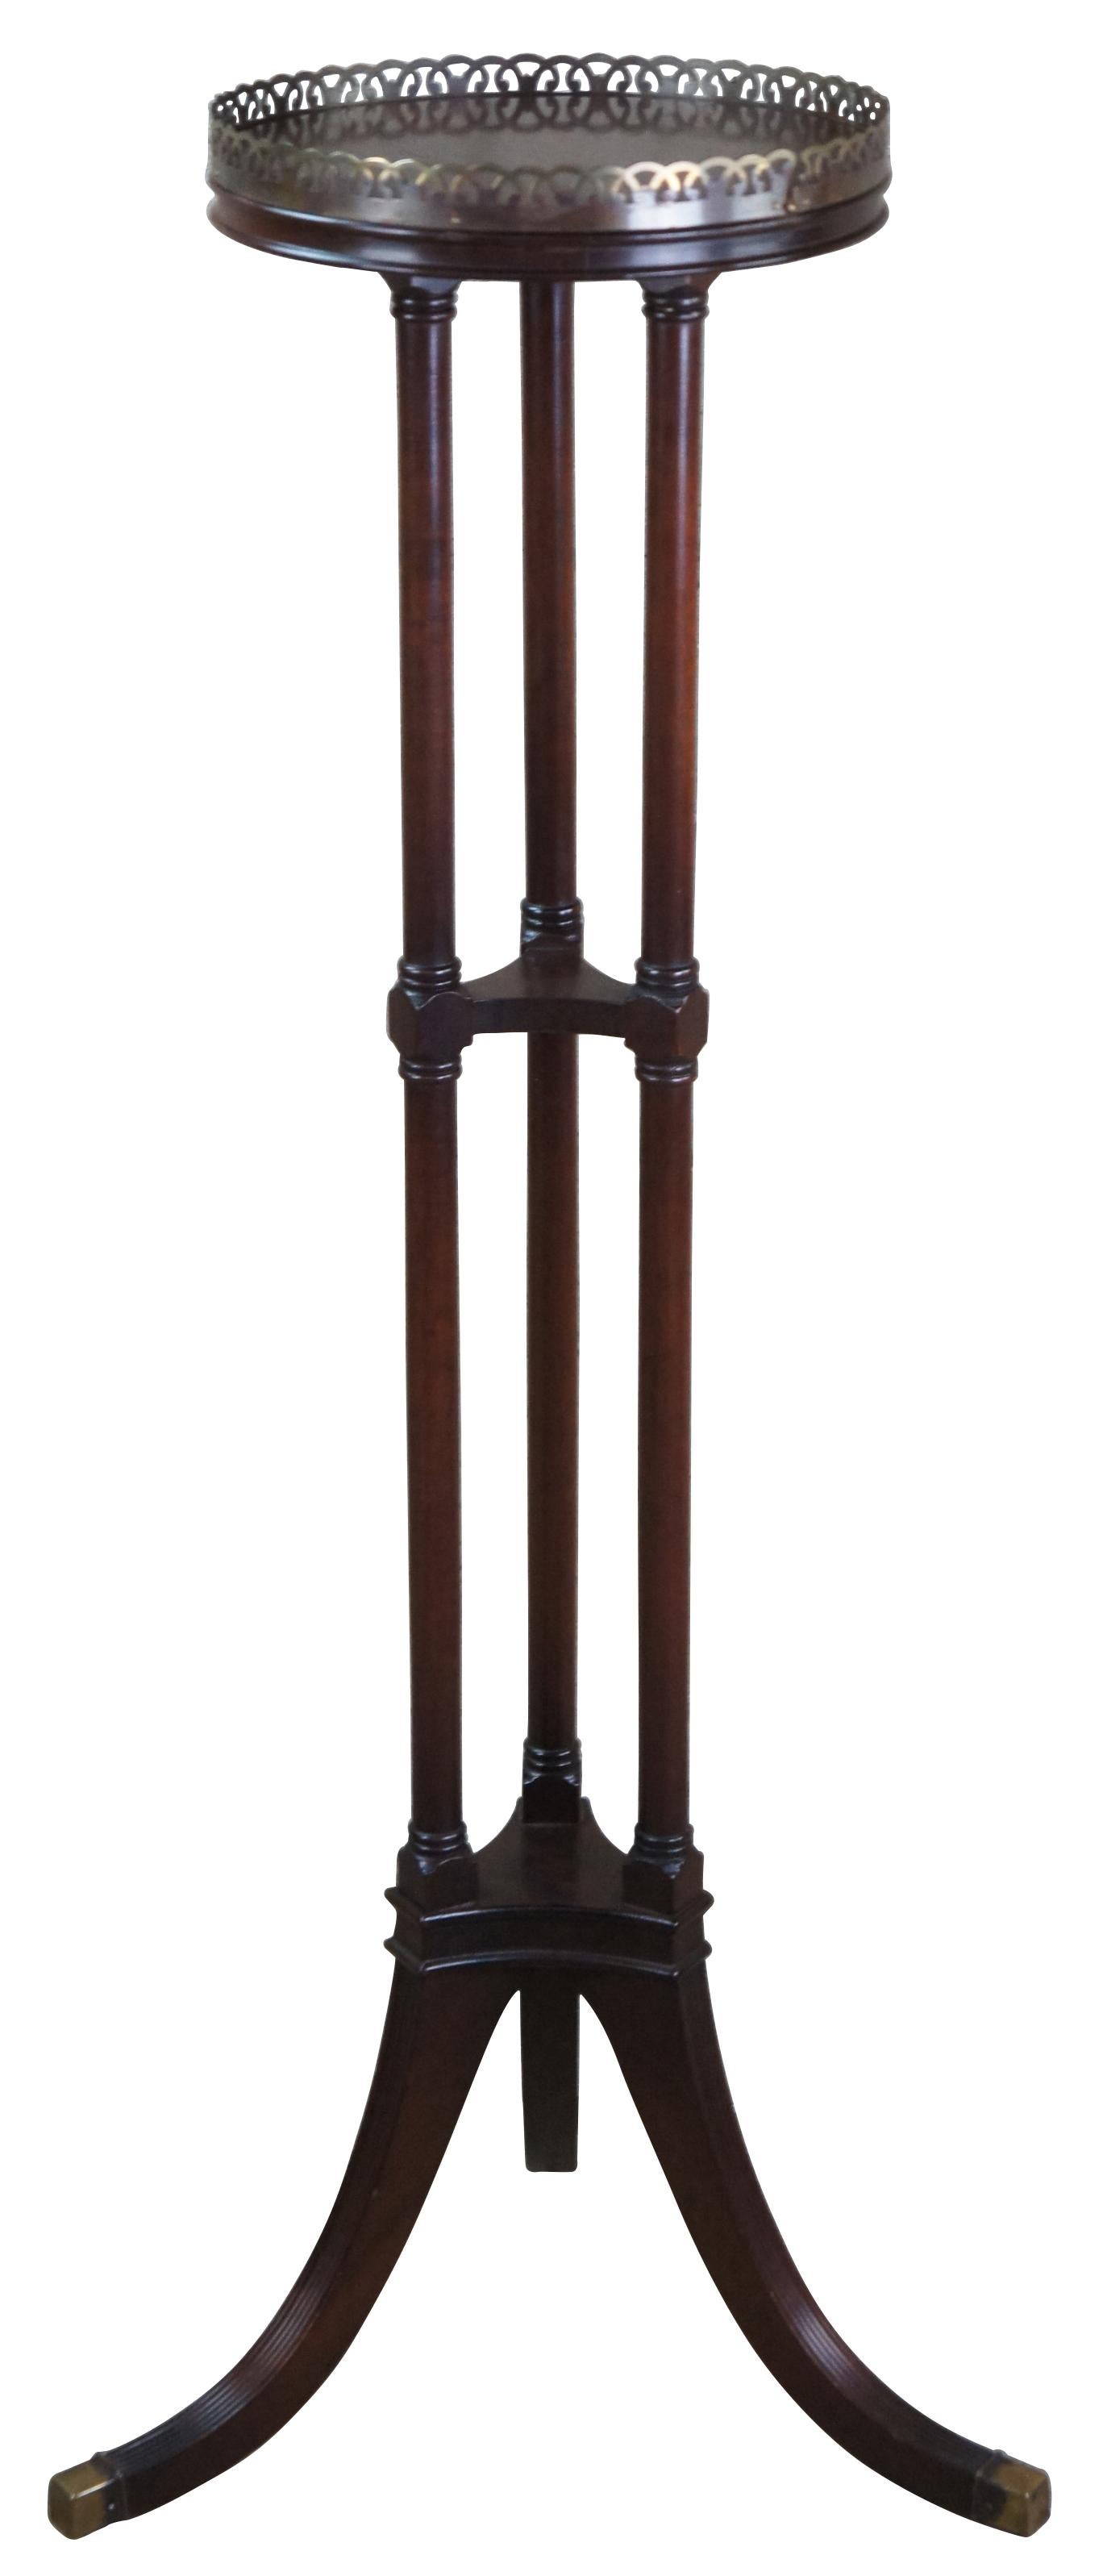 Antique Ferguson Bros Mfg Co pedestal table or plant stand. Made of mahogany featuring a tiered design with flared fluted legs, three turned columns and brass gallery.

Ferguson Brothers Manufacturing Company (founded 1878 in New York City) was